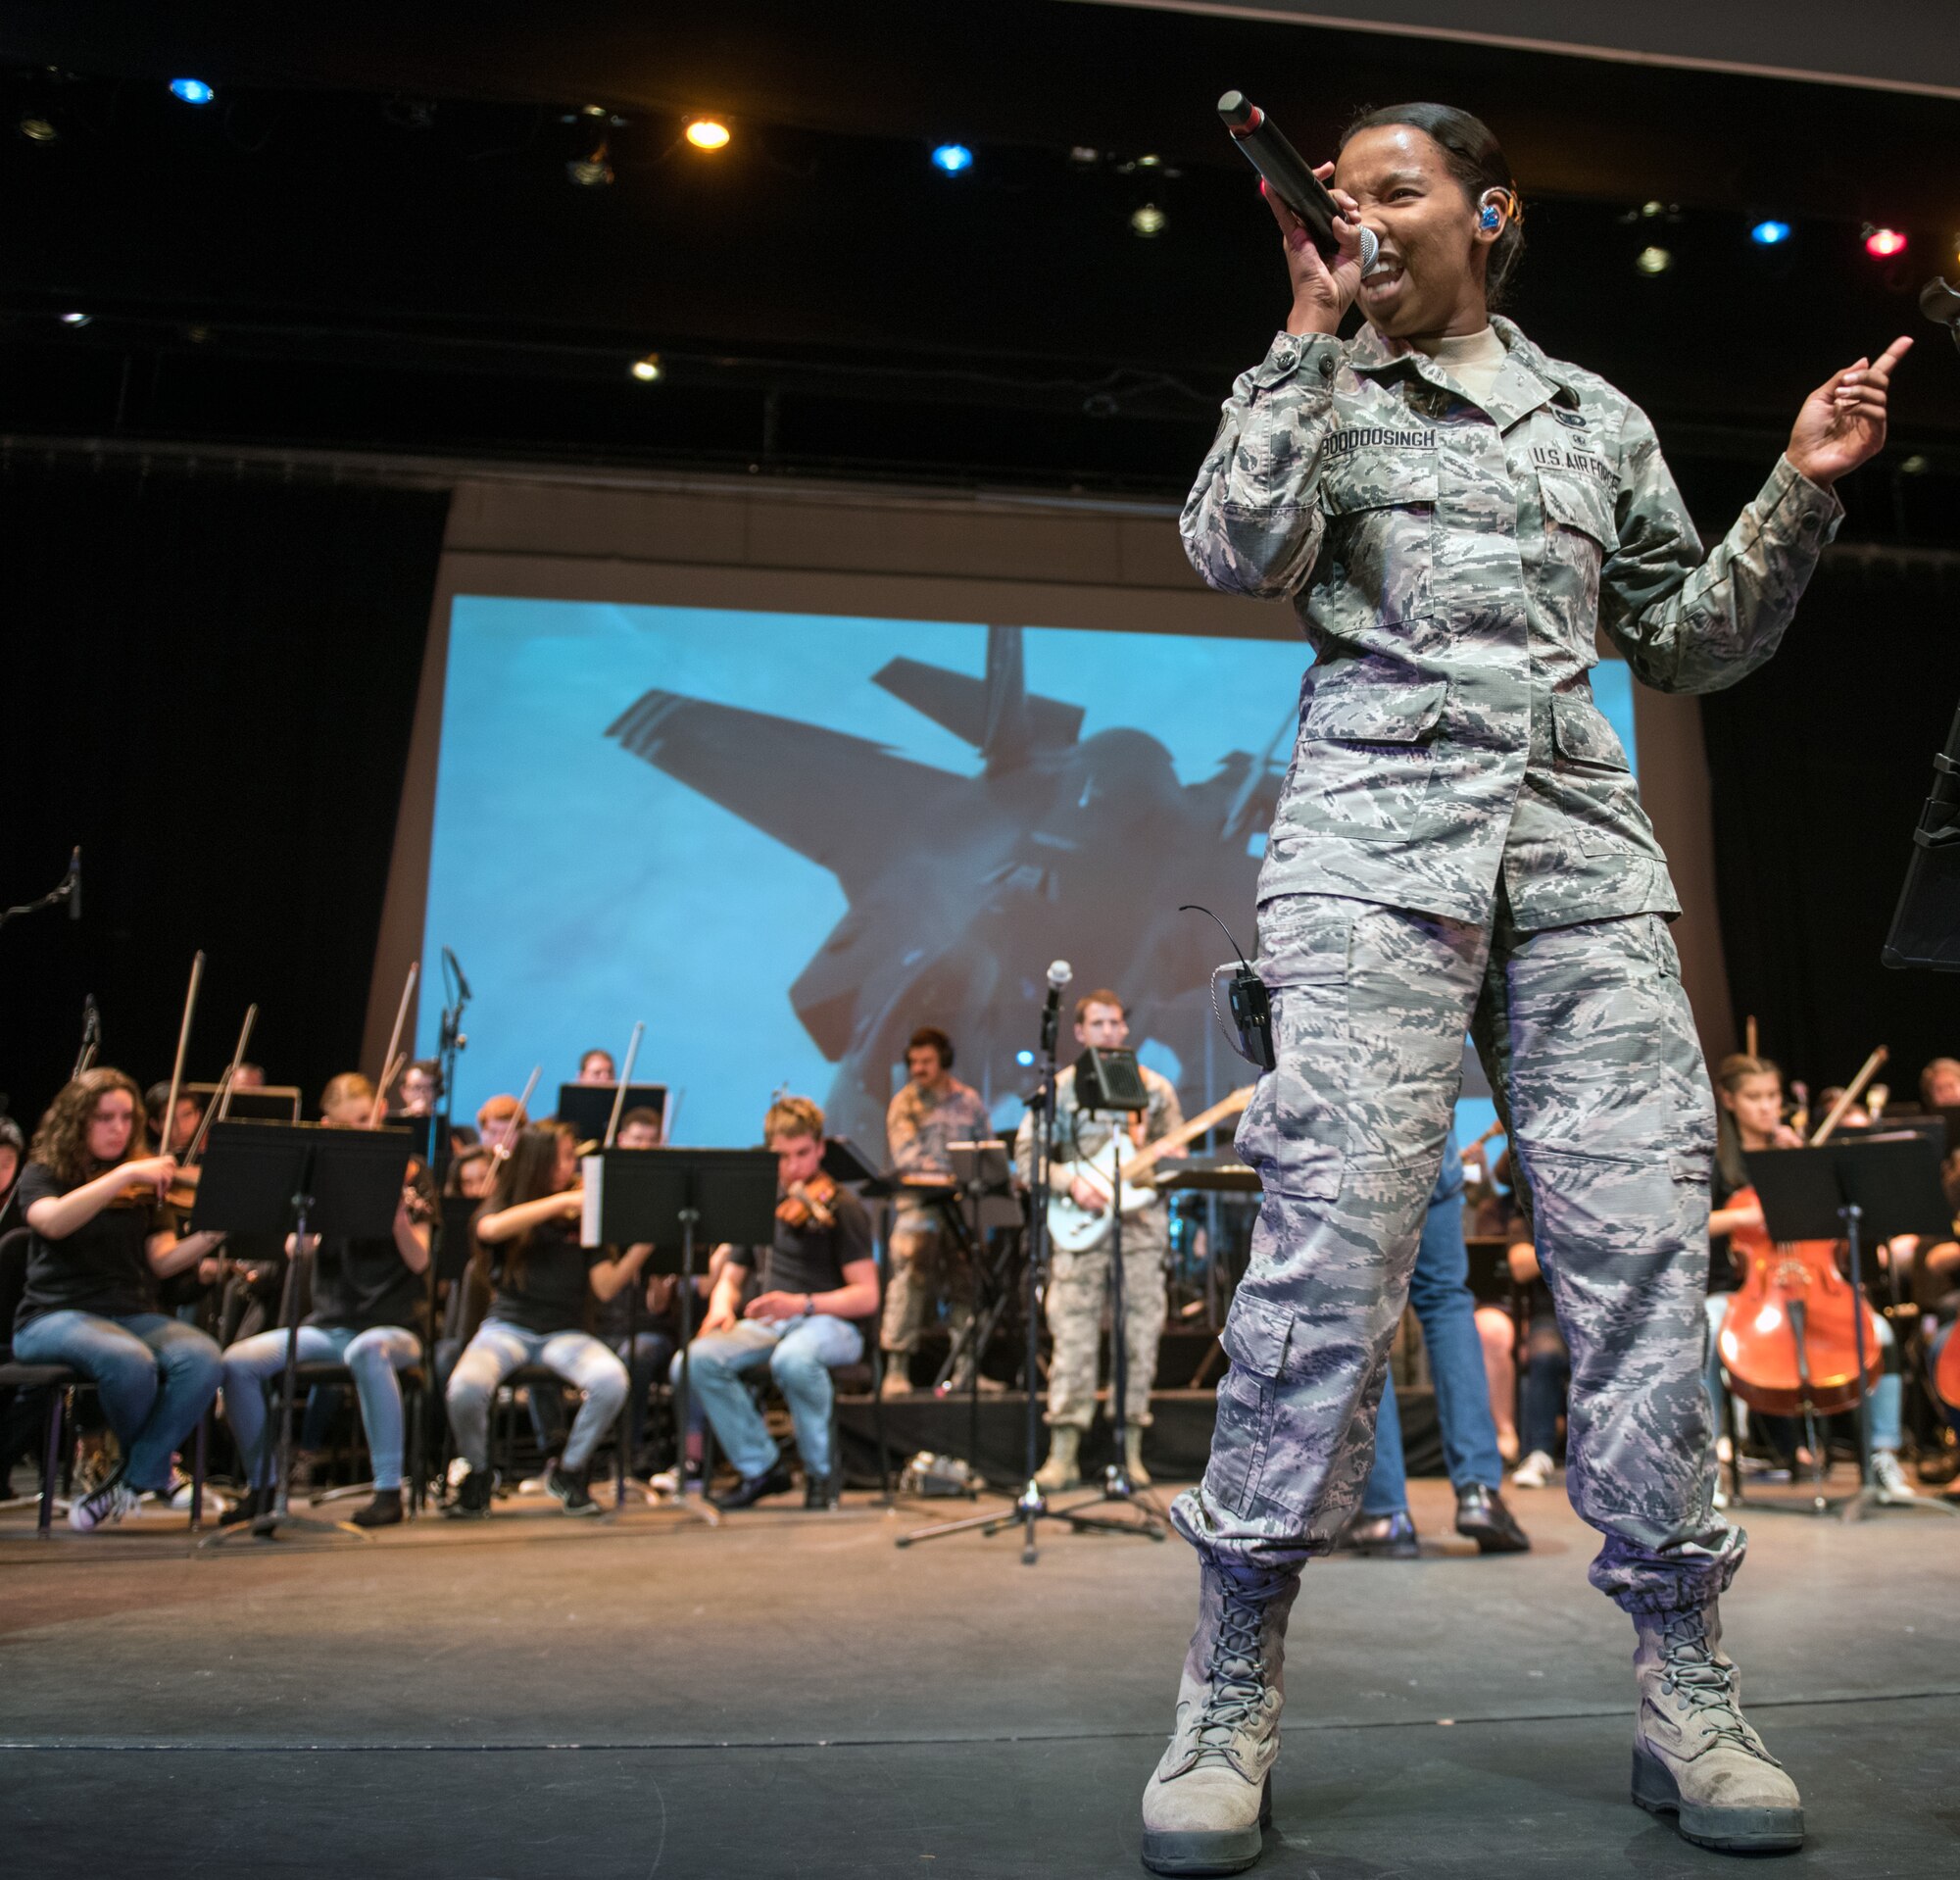 U.S. Air Force Senior Airman Salina Boodoosingh, a vocalist with the rock music group “Mobility” of The United States Air Force Band of the Golden West, Travis Air Force Base, Calif., performs with musicians from the Napa Valley Youth Symphony at the Veteran’s Home in Yountville, Calif., March 4, 2018. The band and symphony are performing together after the original concert, scheduled in October 2017, was canceled due to devastating wildfires in Napa and Sonoma counties. (U.S. Air Force photo by Louis Briscese)